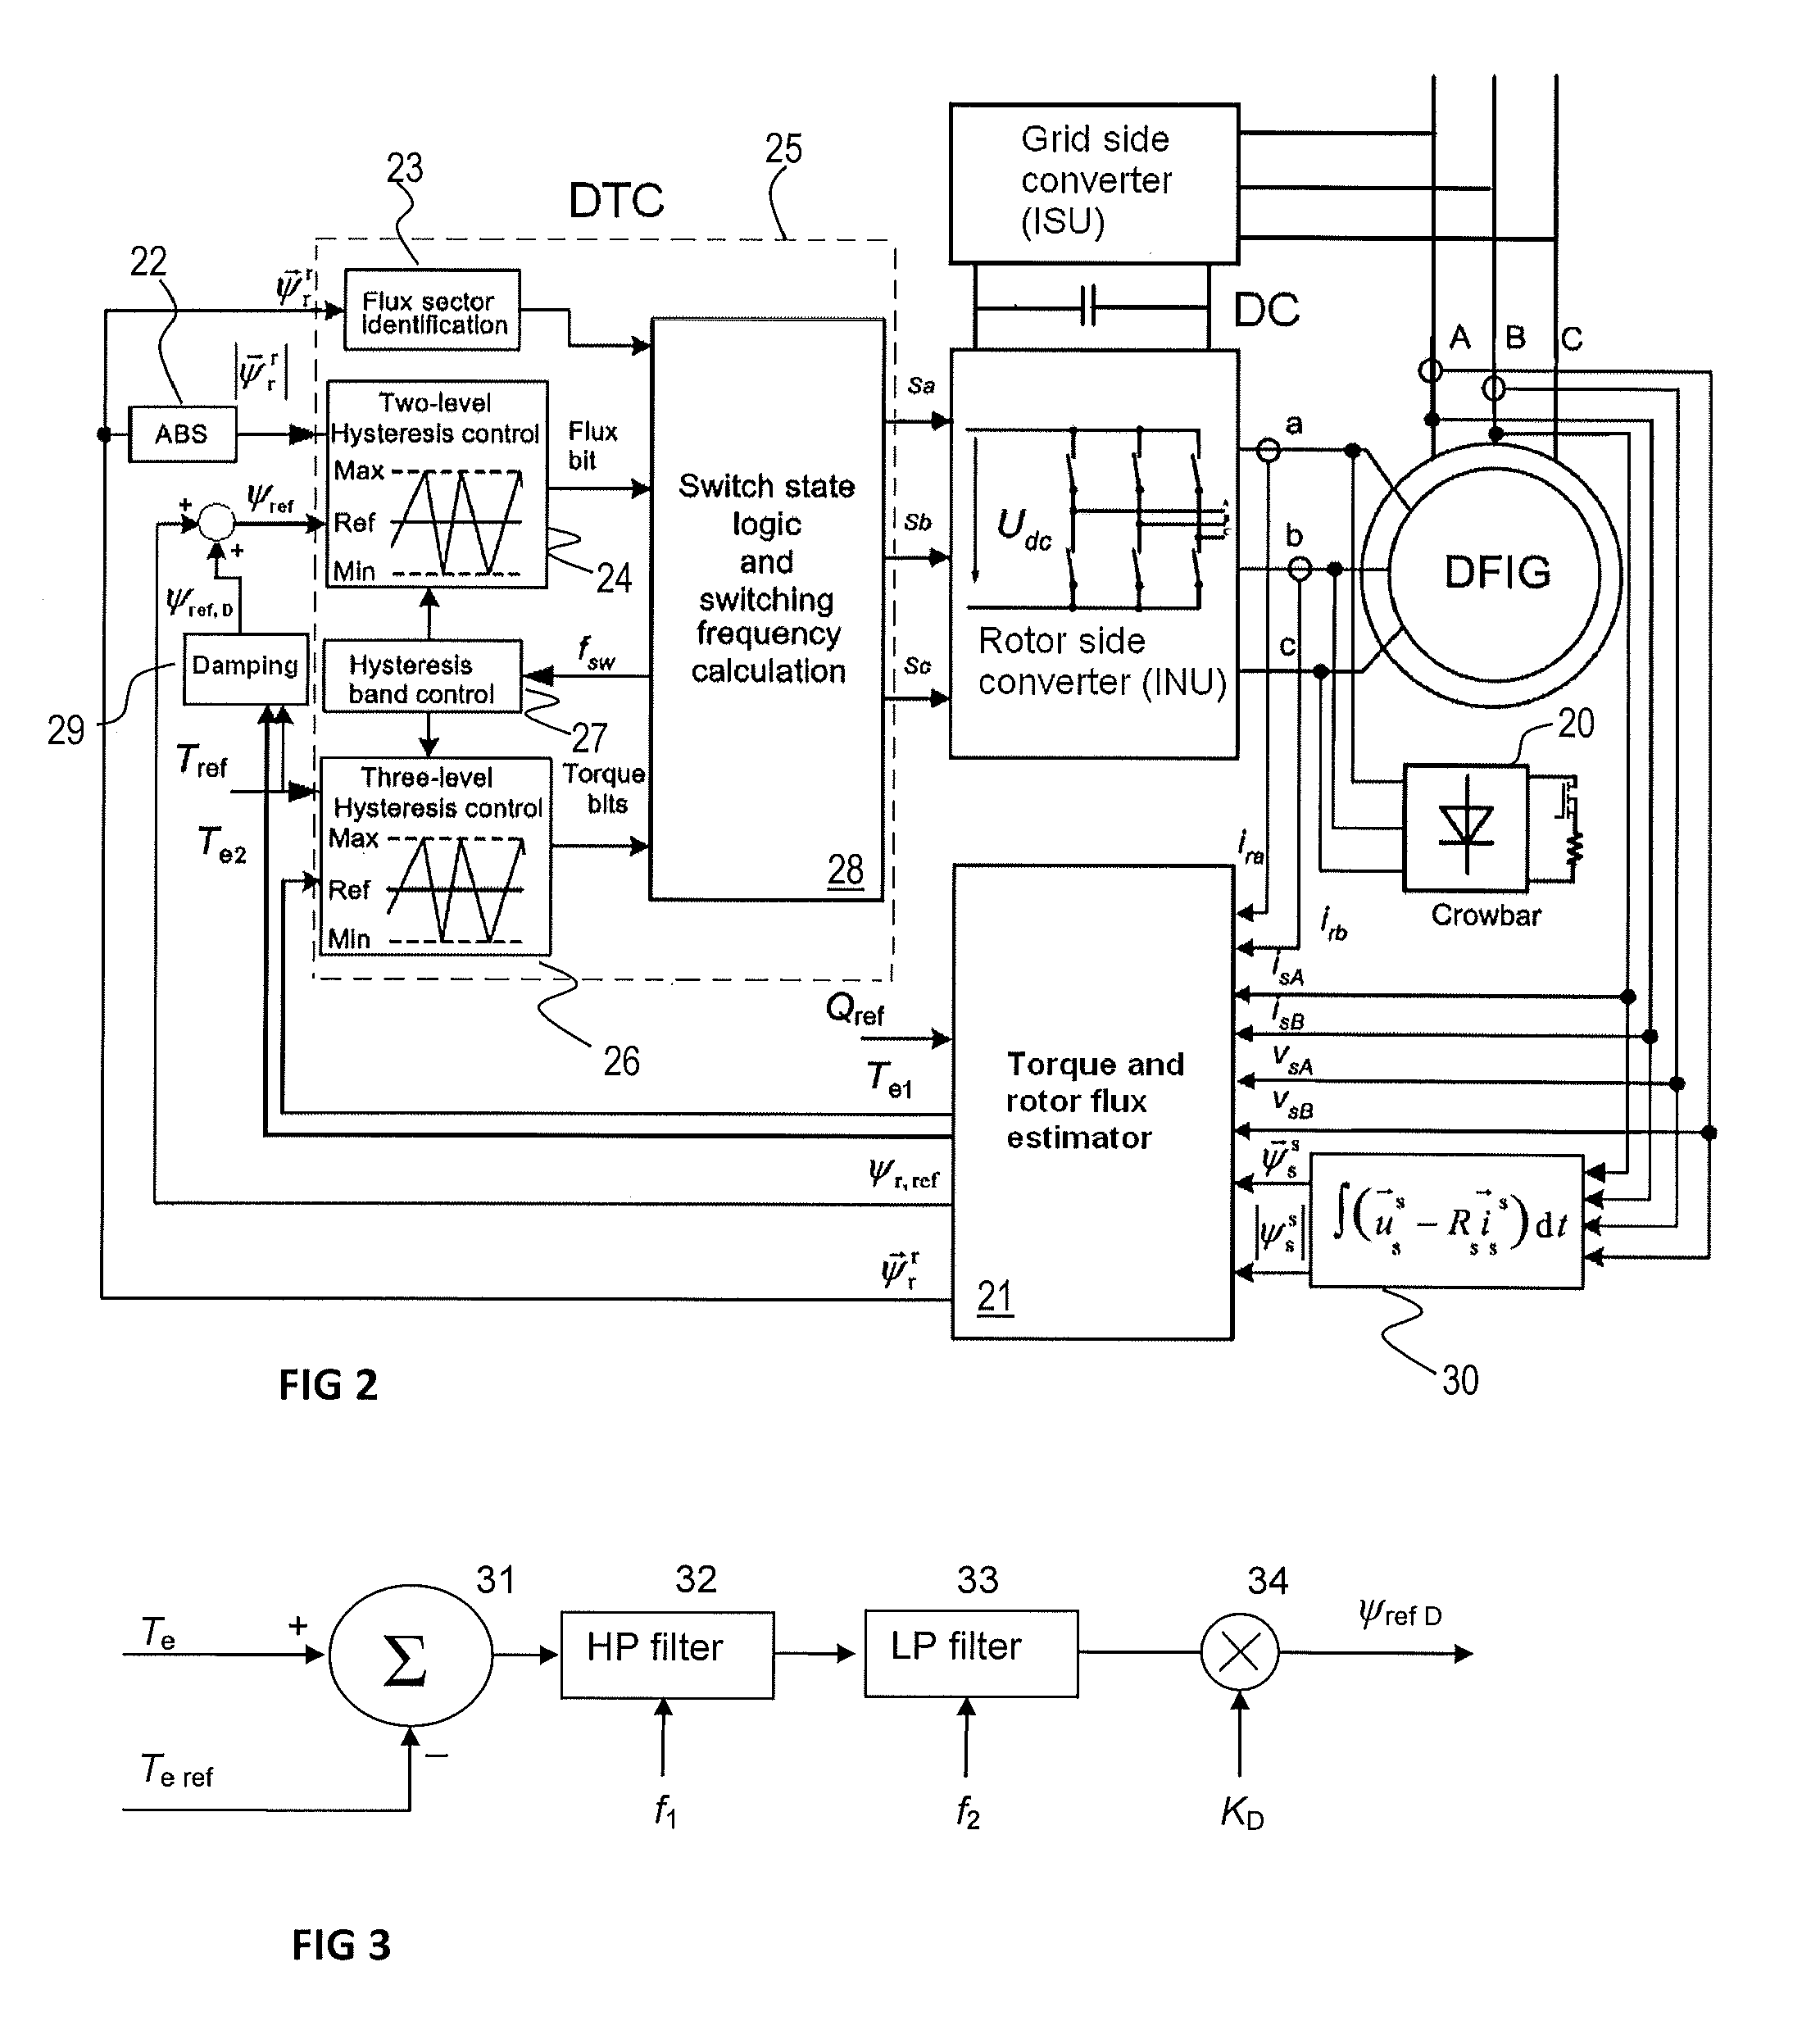 Control system for doubly-fed induction machine